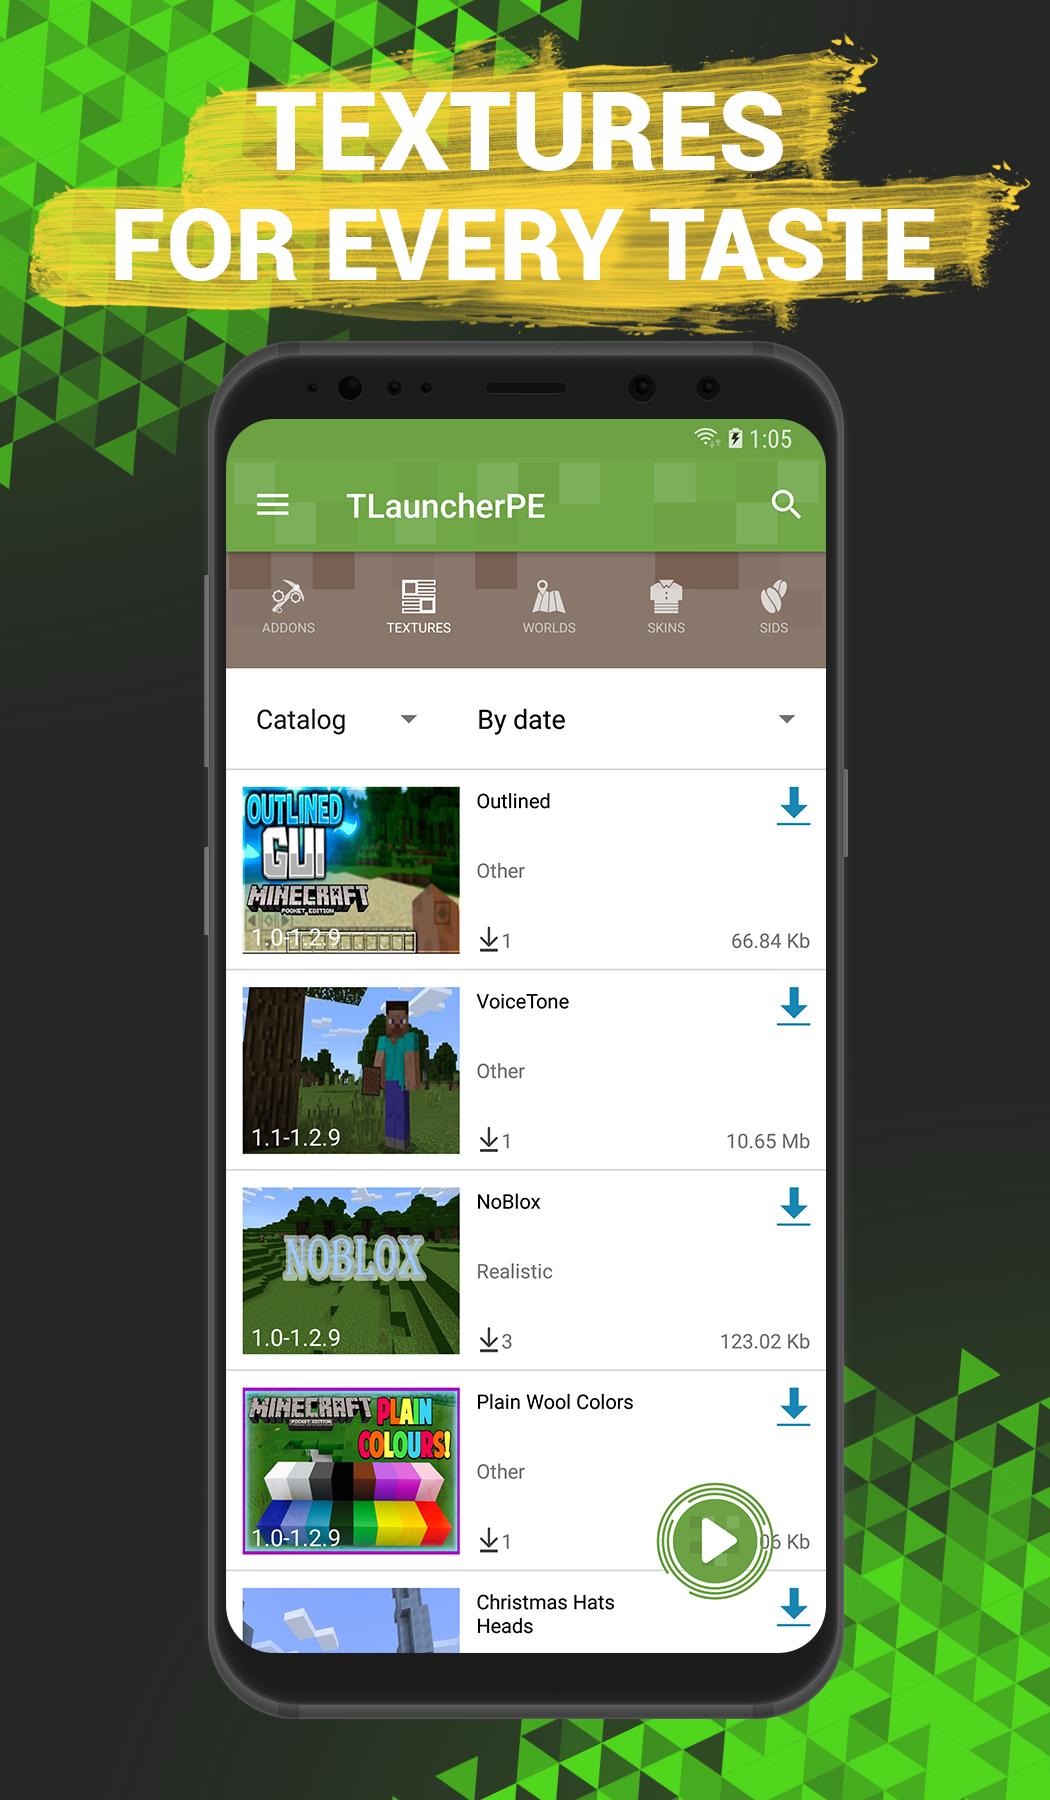 TLauncher PE (1.20, 1.19) - Fastest Way to Get Resources for Minecraft PE 4